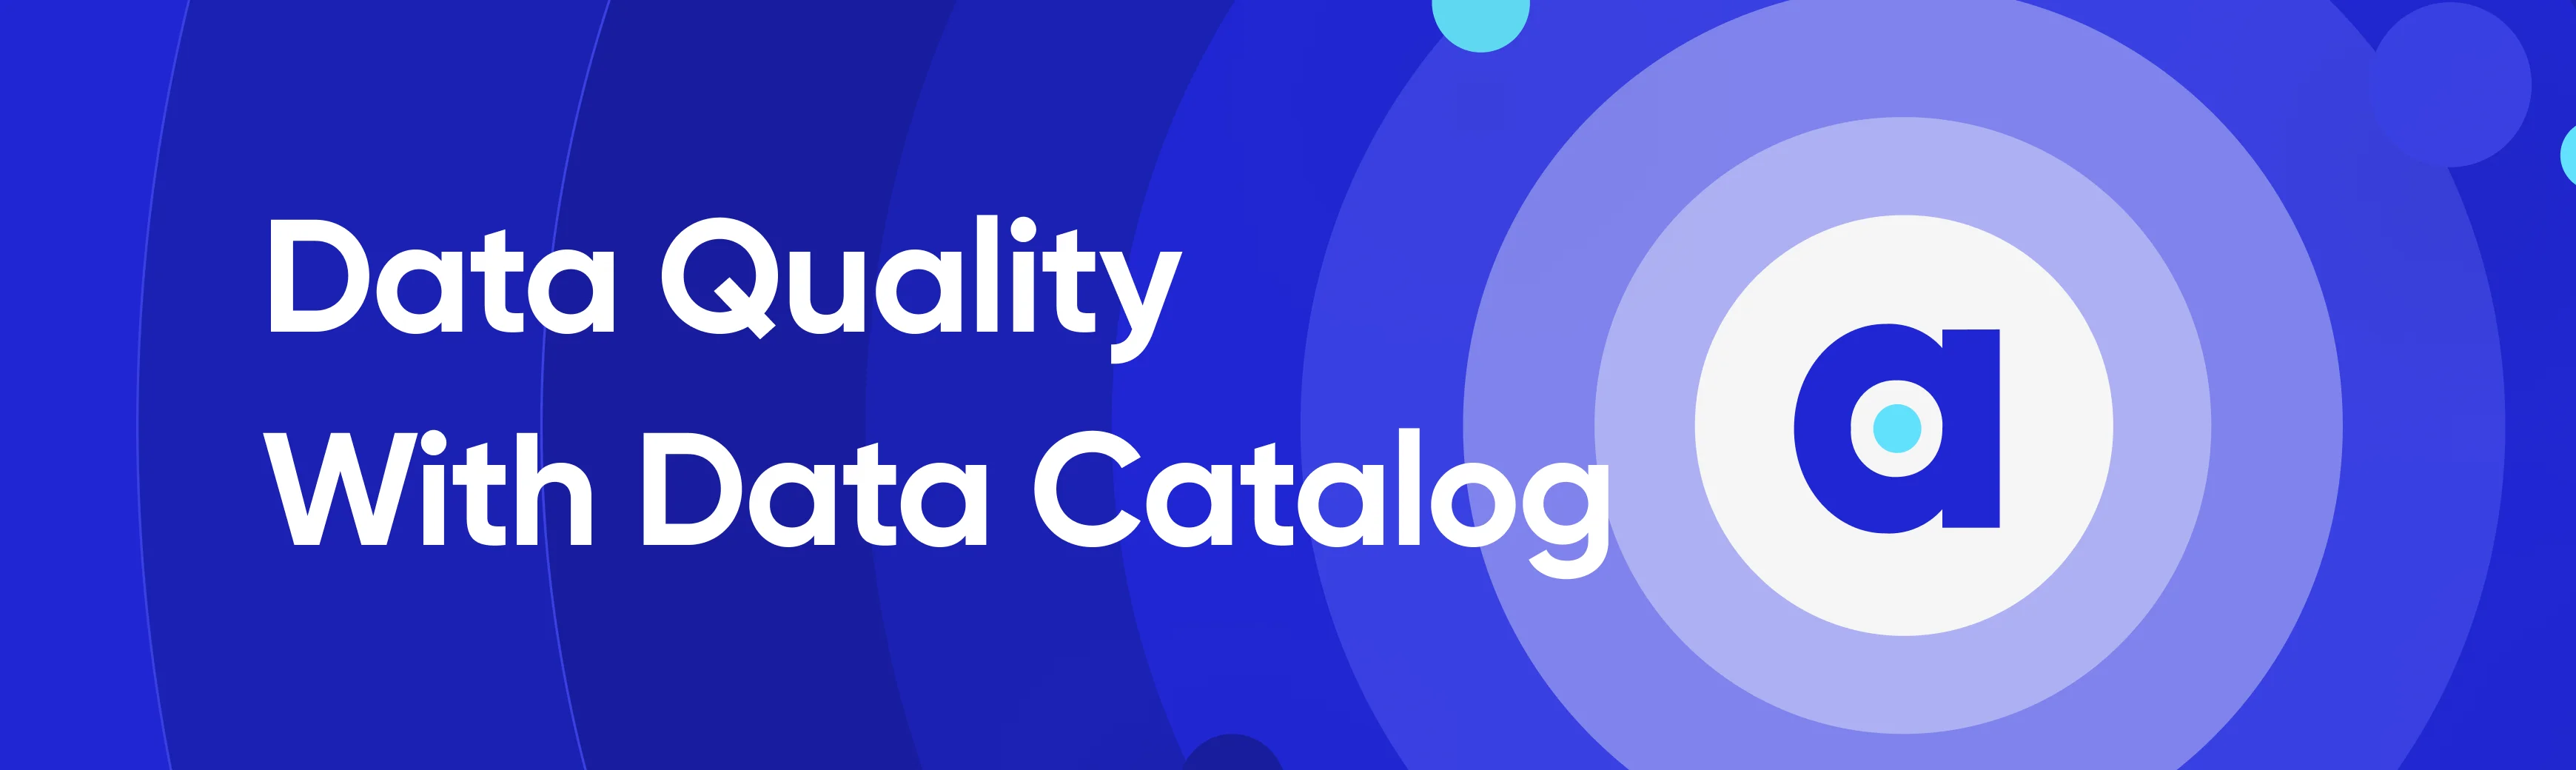 Data quality with data catalog